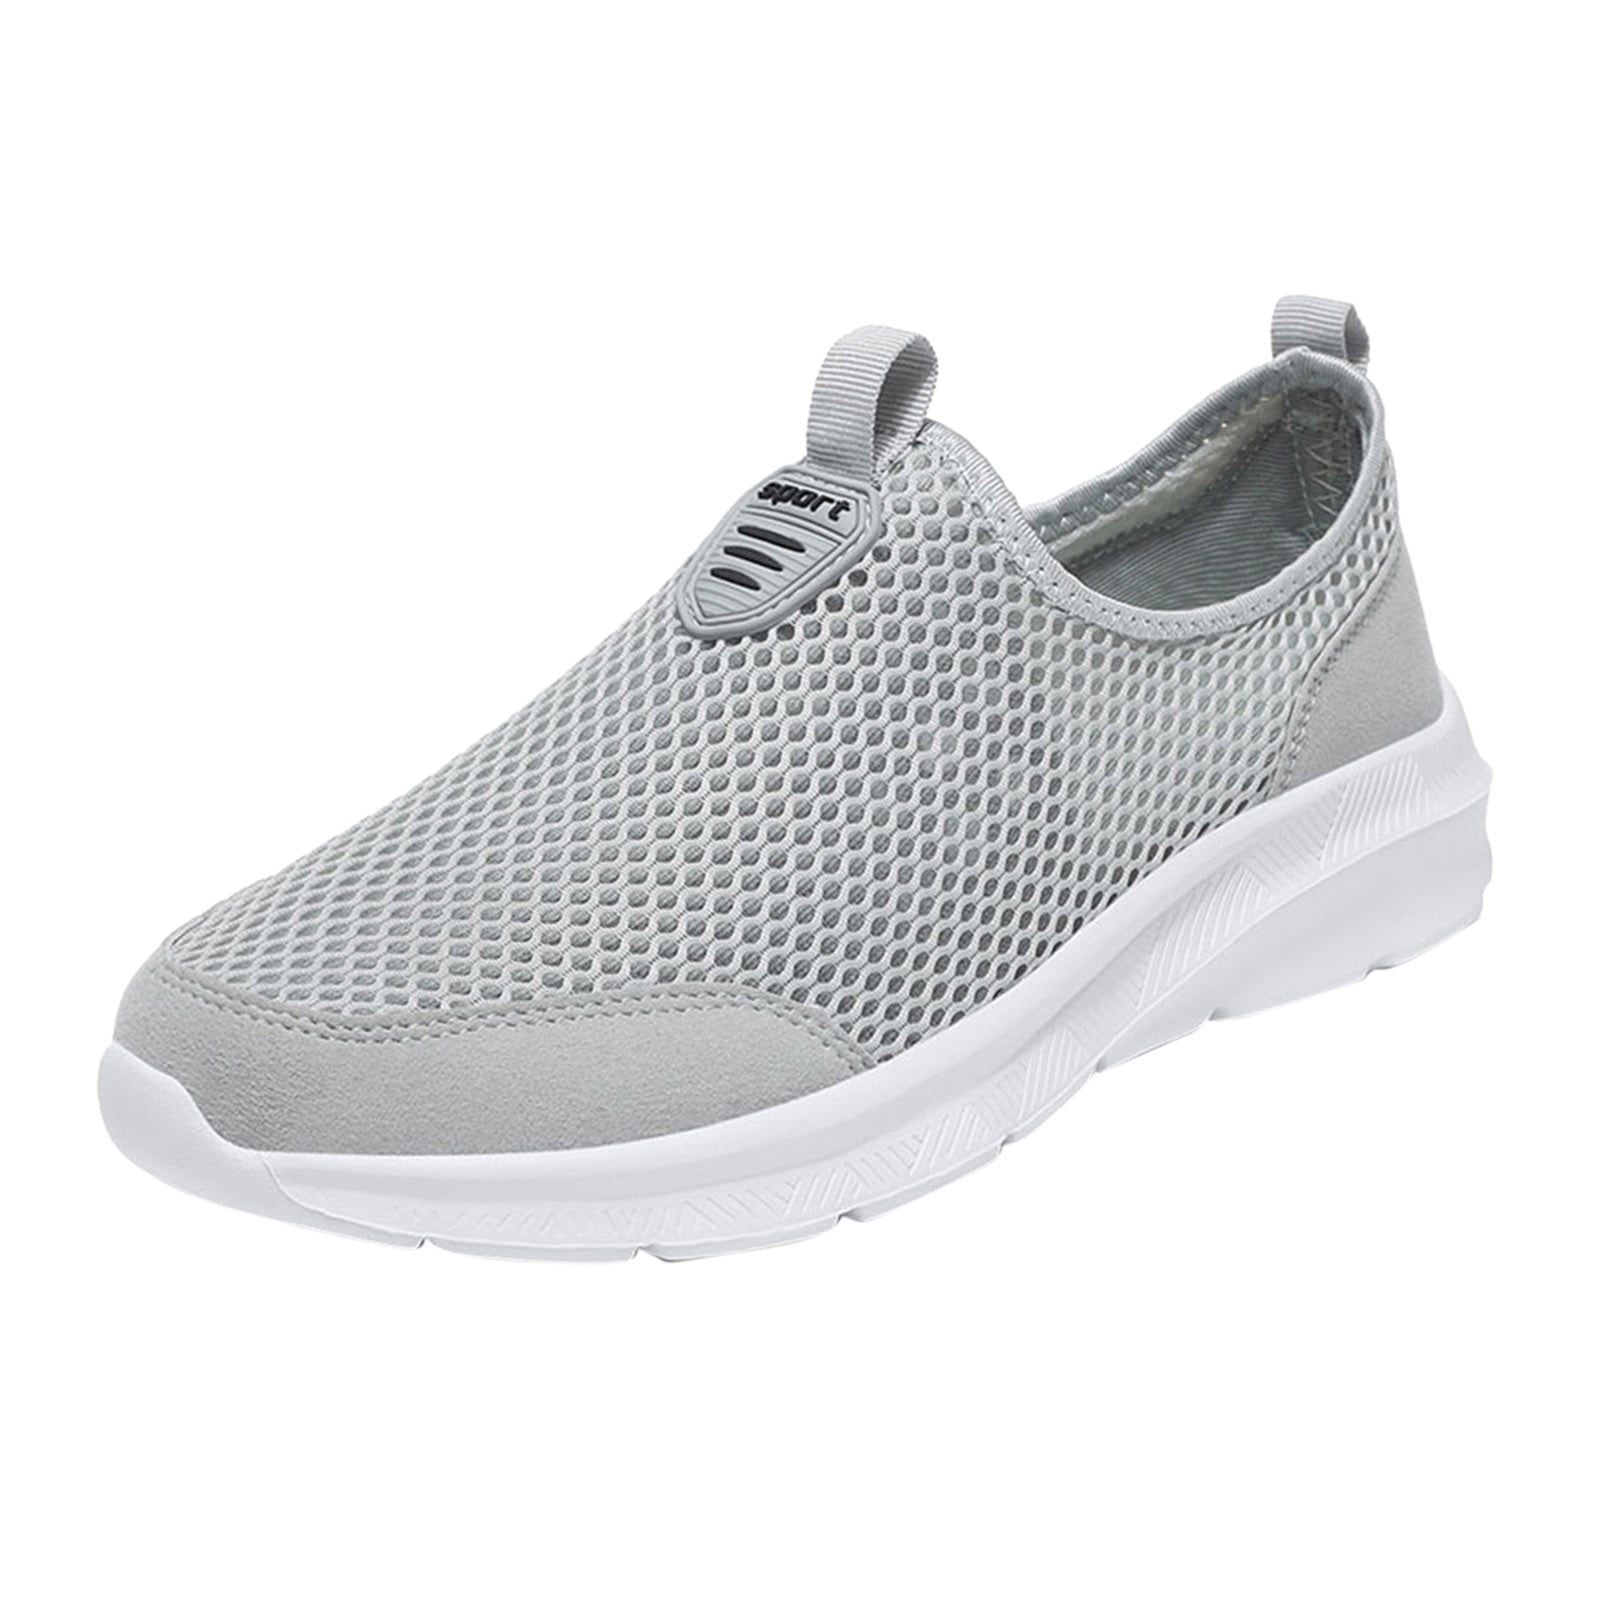 Pimfylm Mens Casual Sneakers Men's Casual Slip-On Fashion Sneakers ...